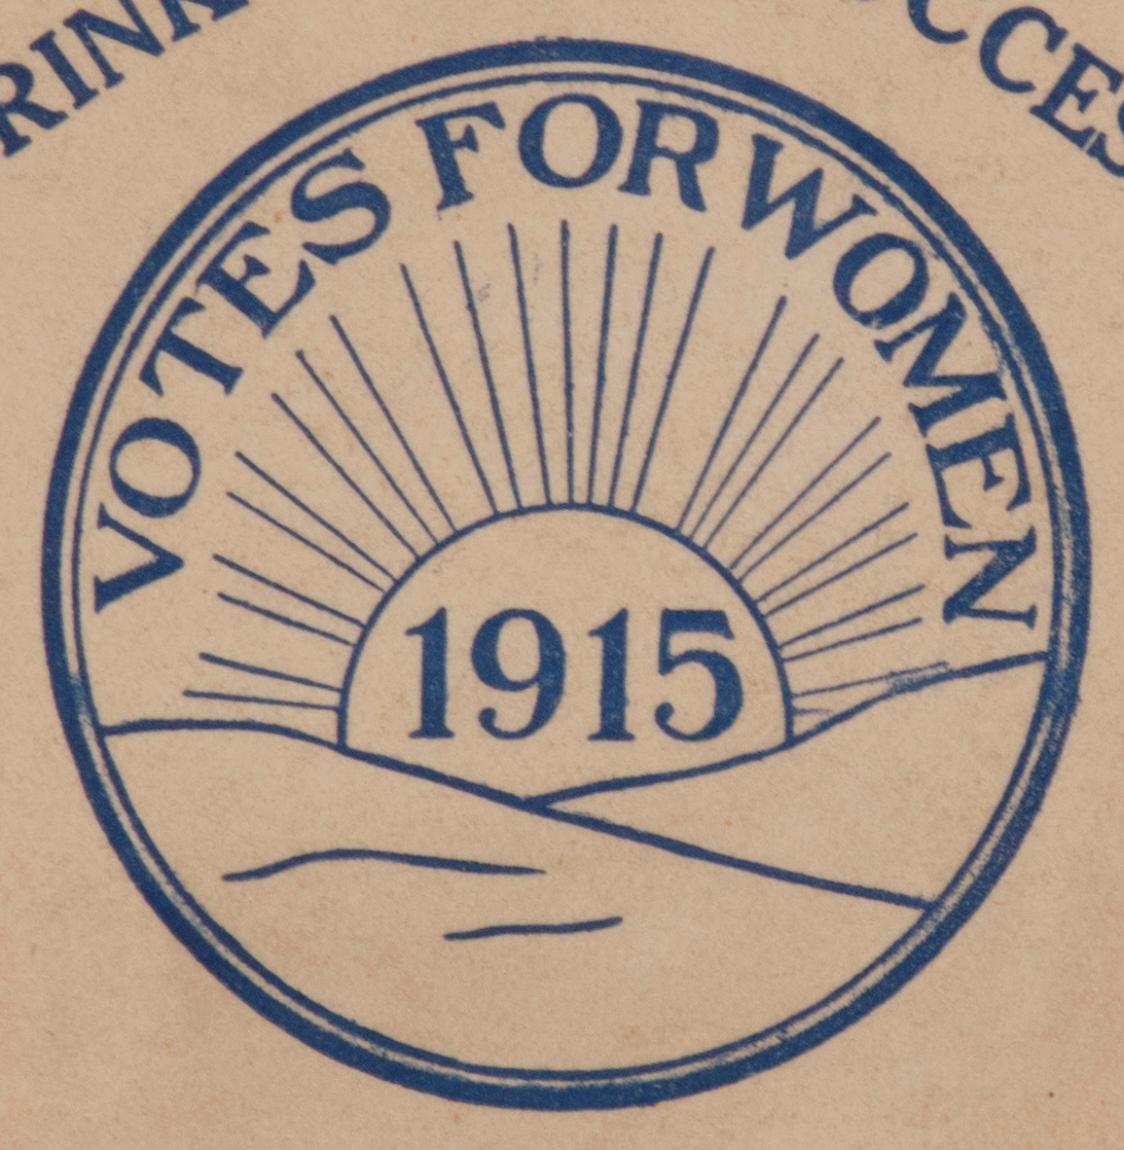 American Collapsible Women's Suffrage Drinking Cup, Empire State Campaign Committee, 1915